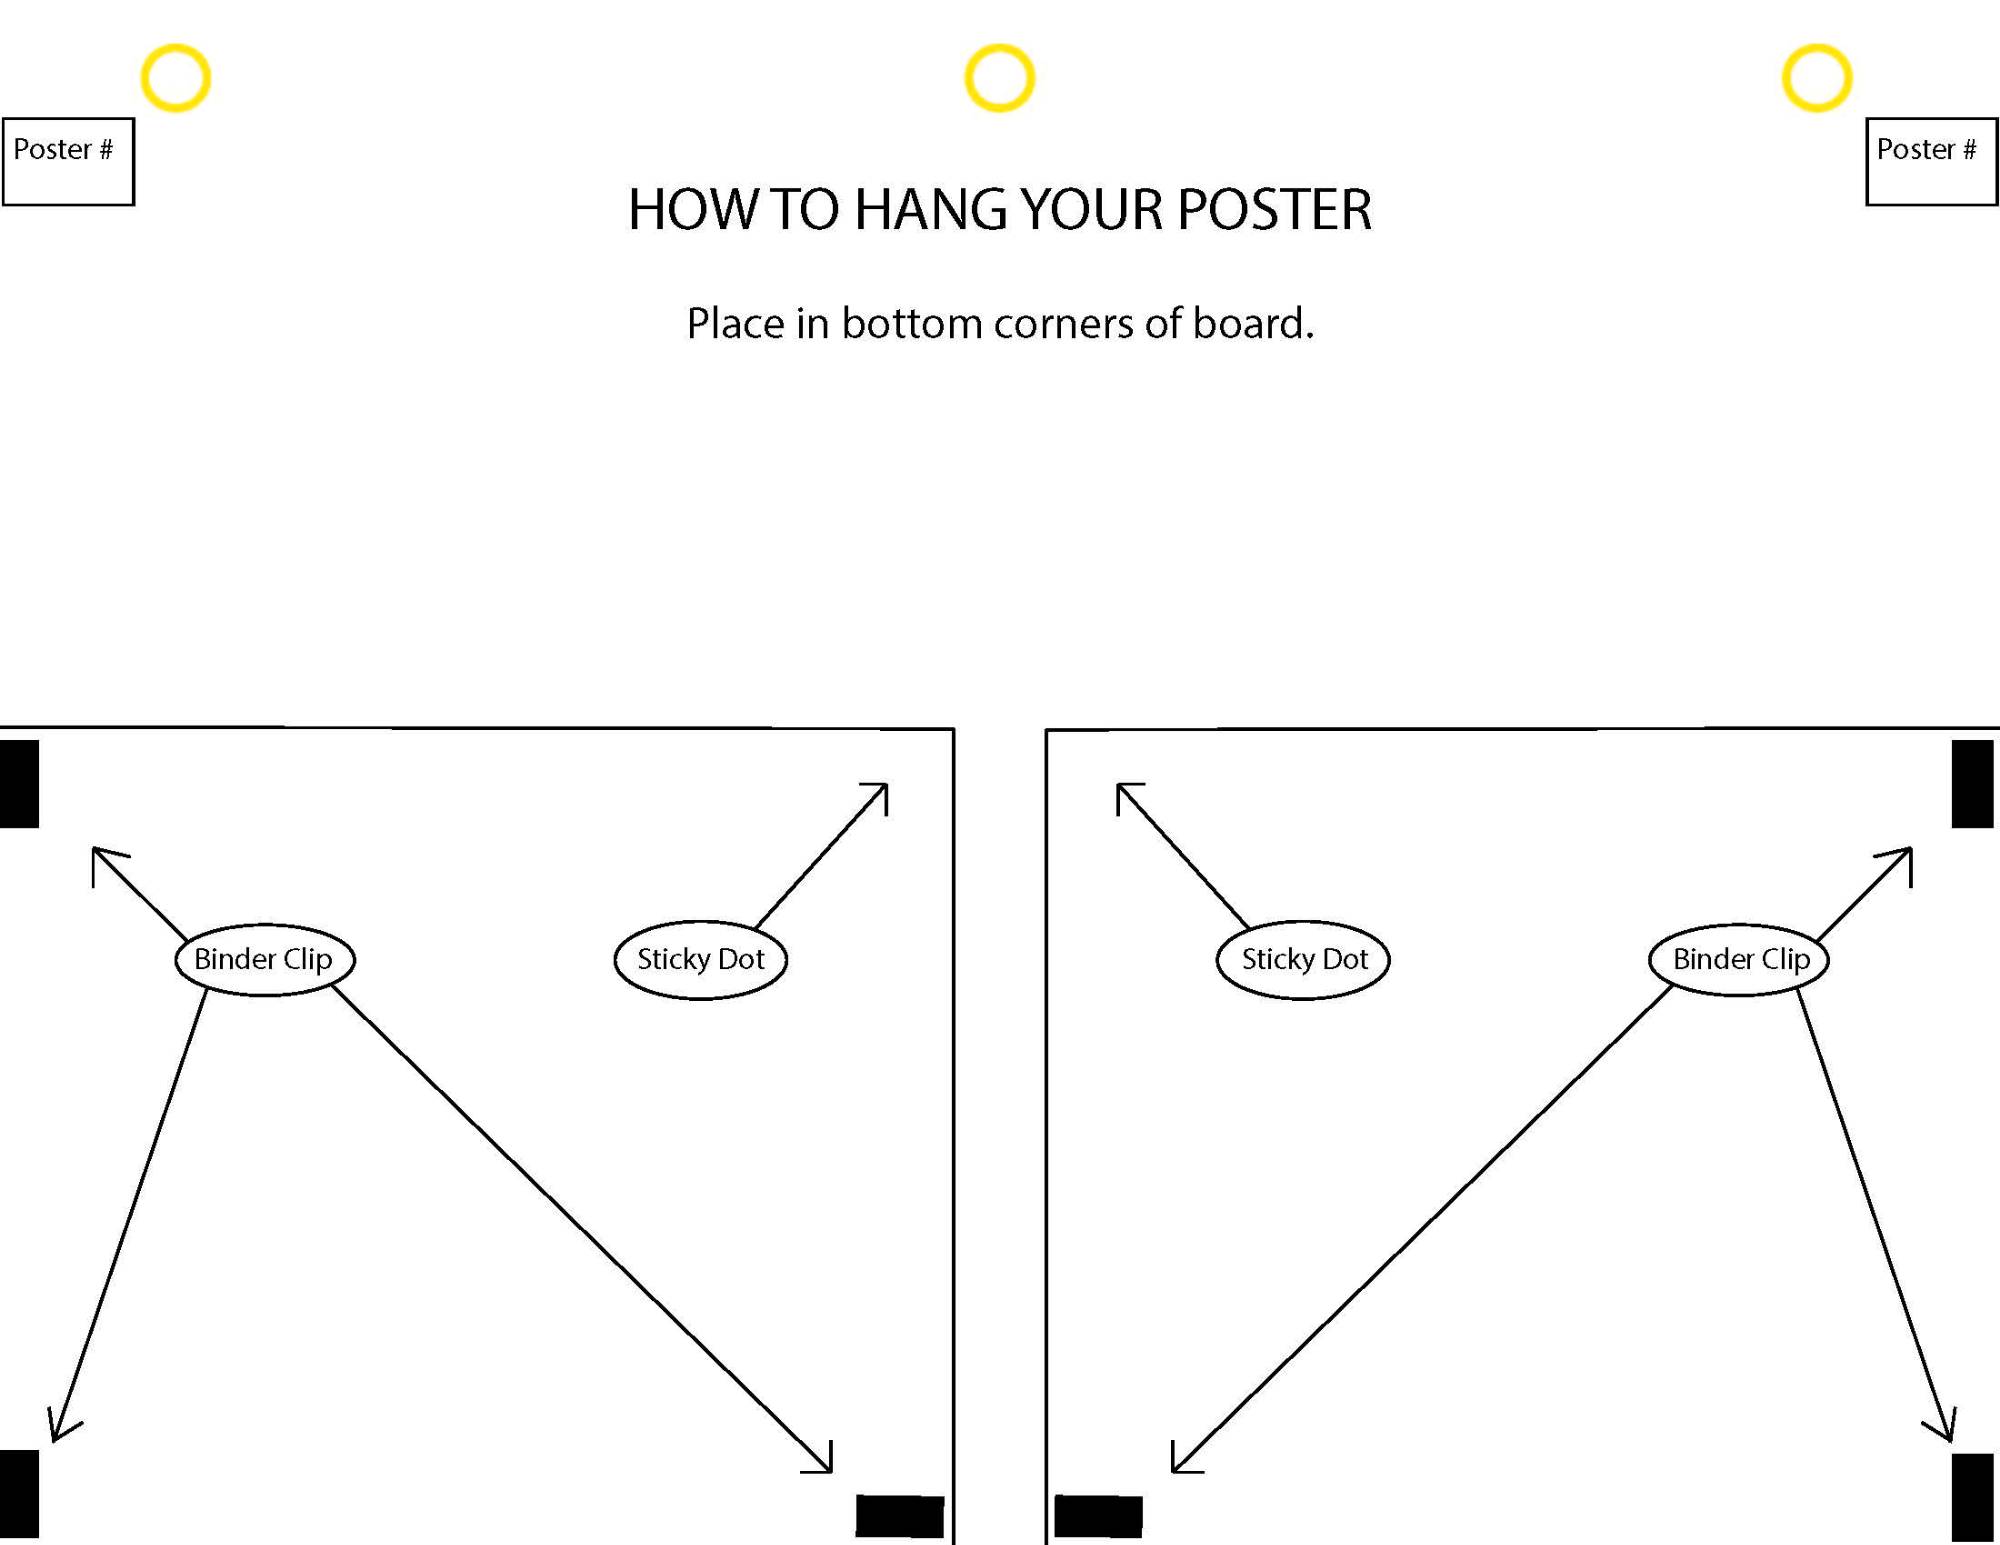 How to Hang Your Poster